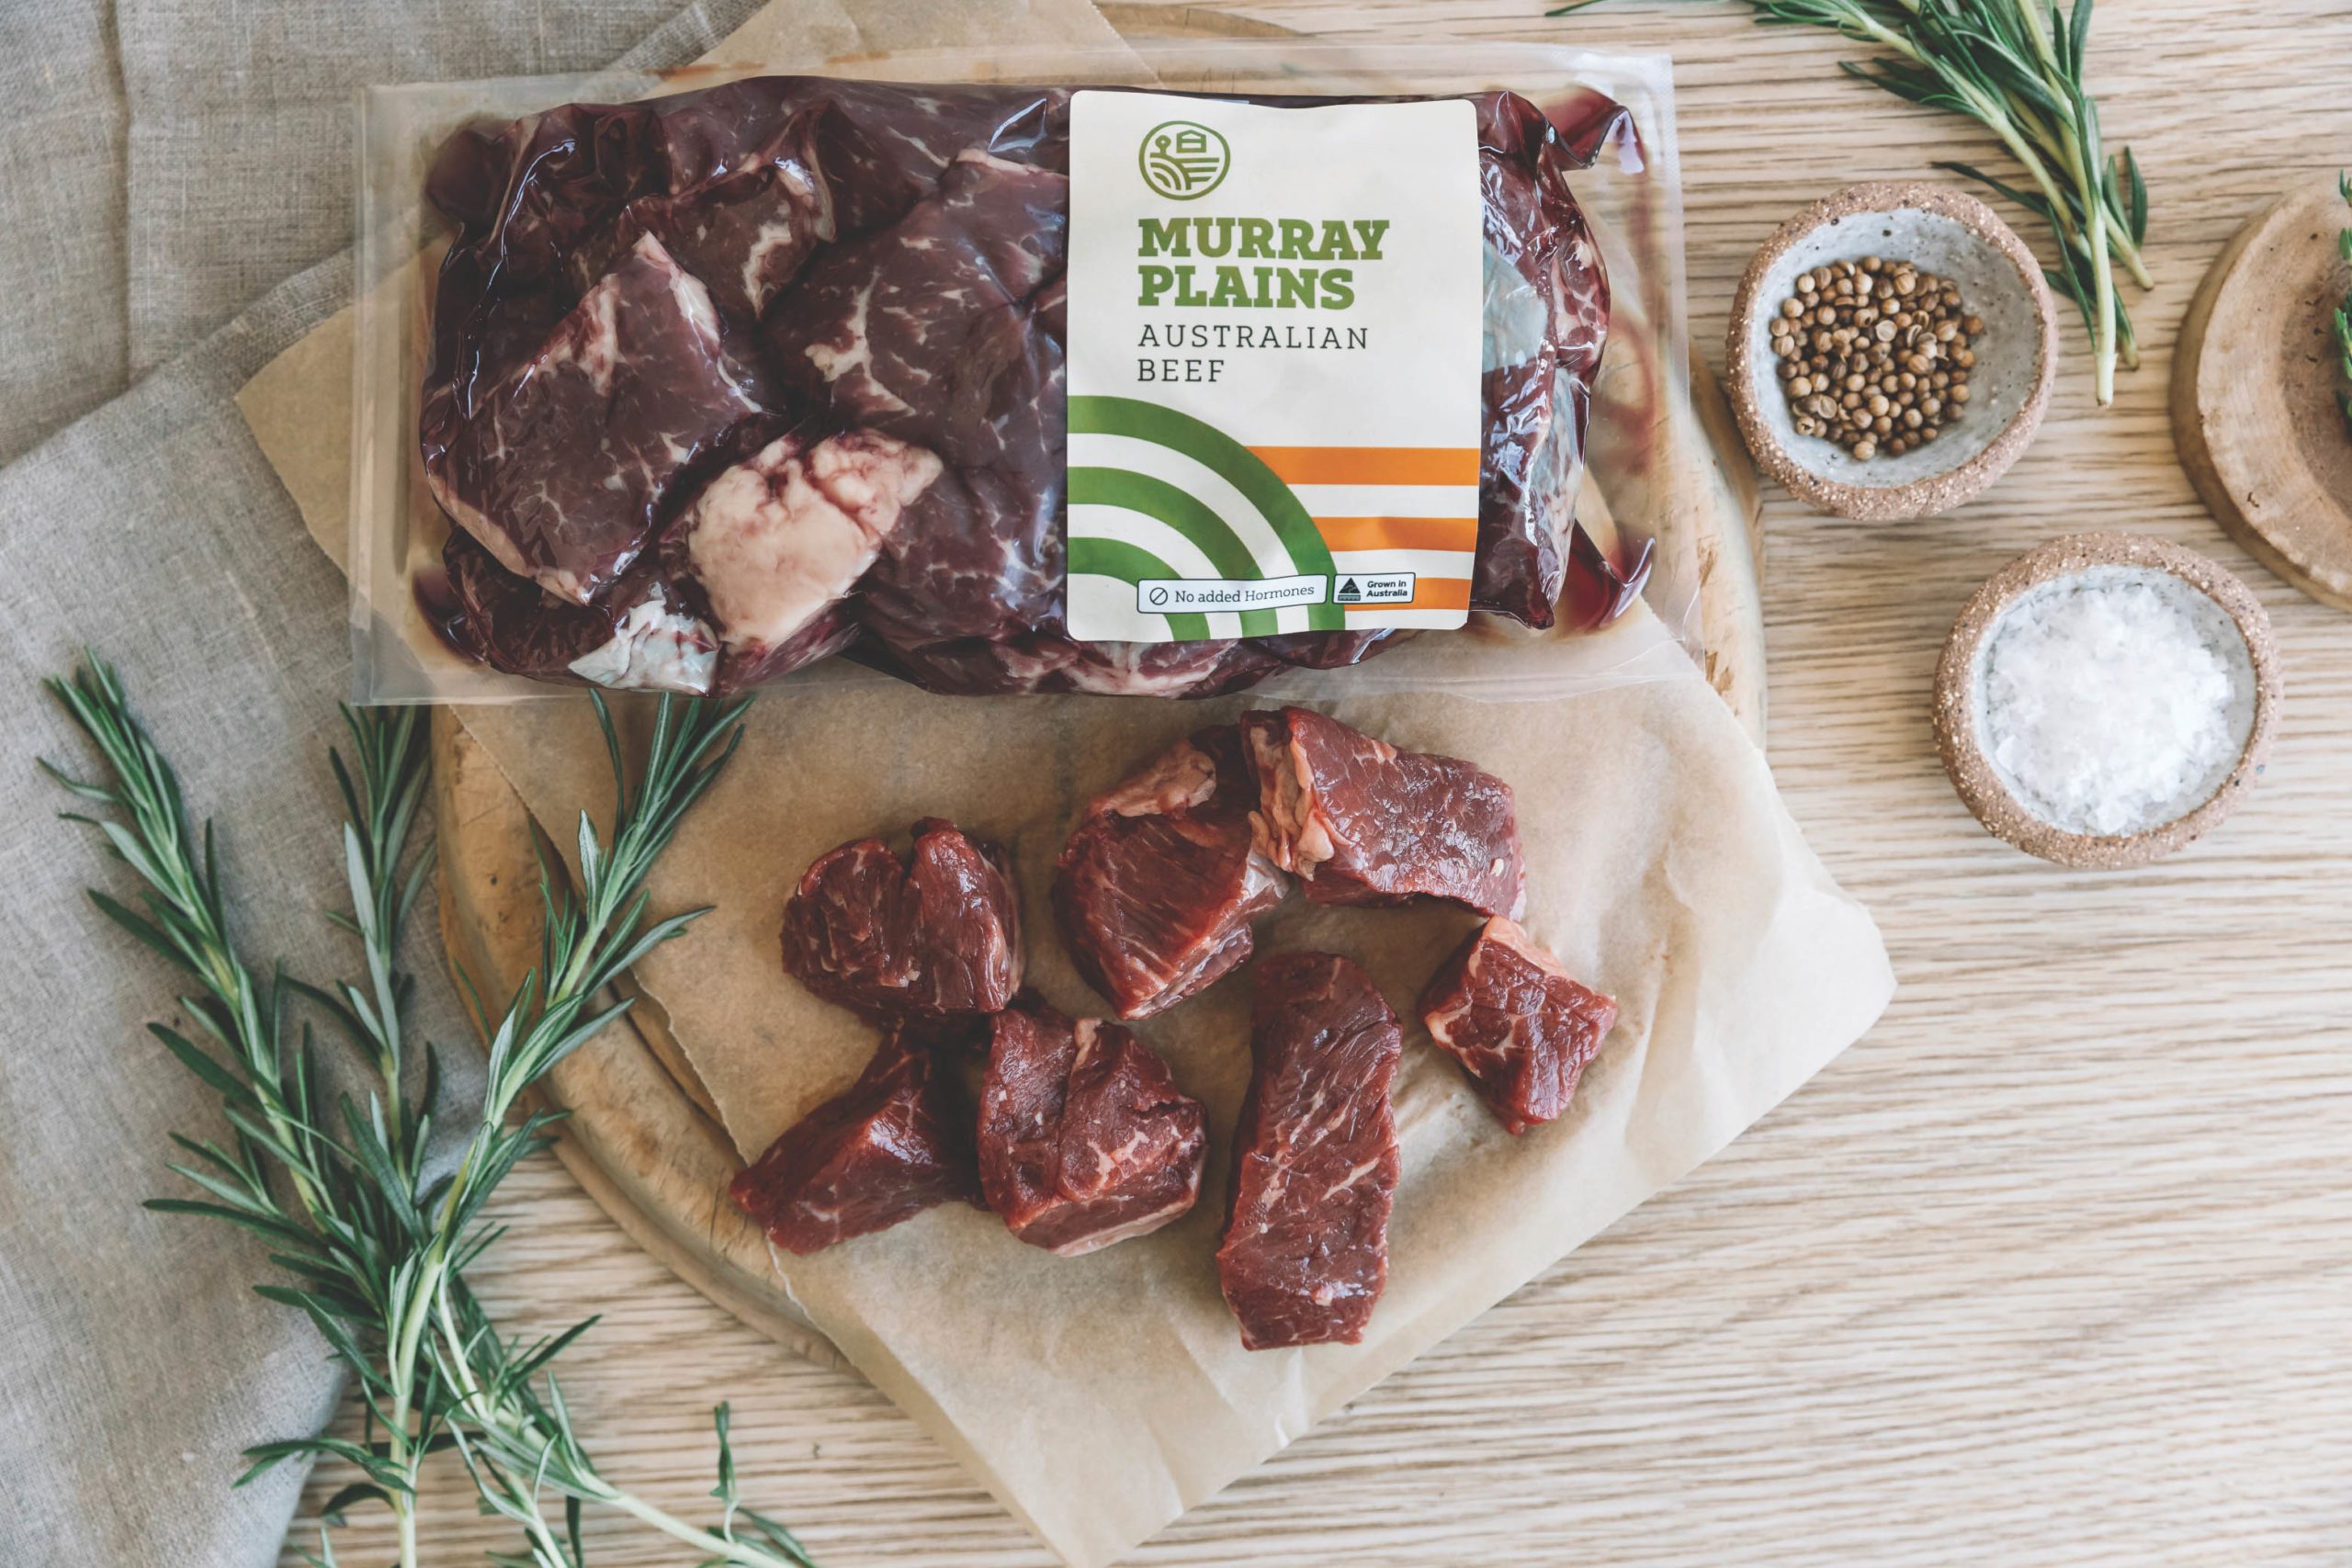 Murray Plains Australian Beef Shrink Wrap packaging, resting on a wooden table, with various ingredients surrounding the raw meat.